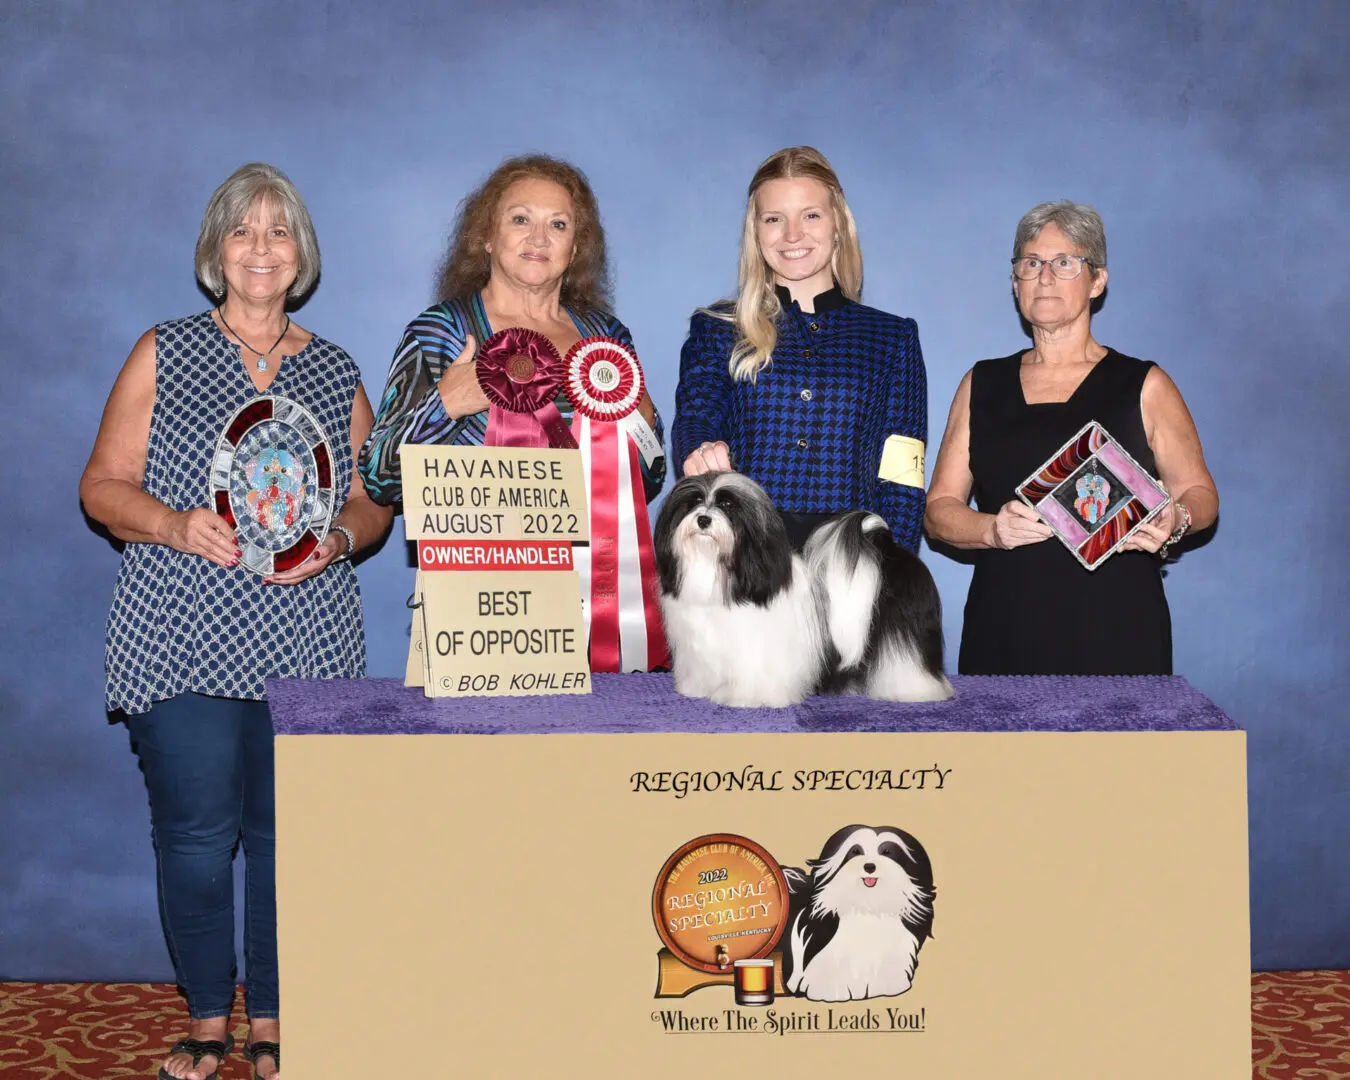 A group of women, proud havanese breeder in Chicago, Illinois, posing with their dogs and trophies